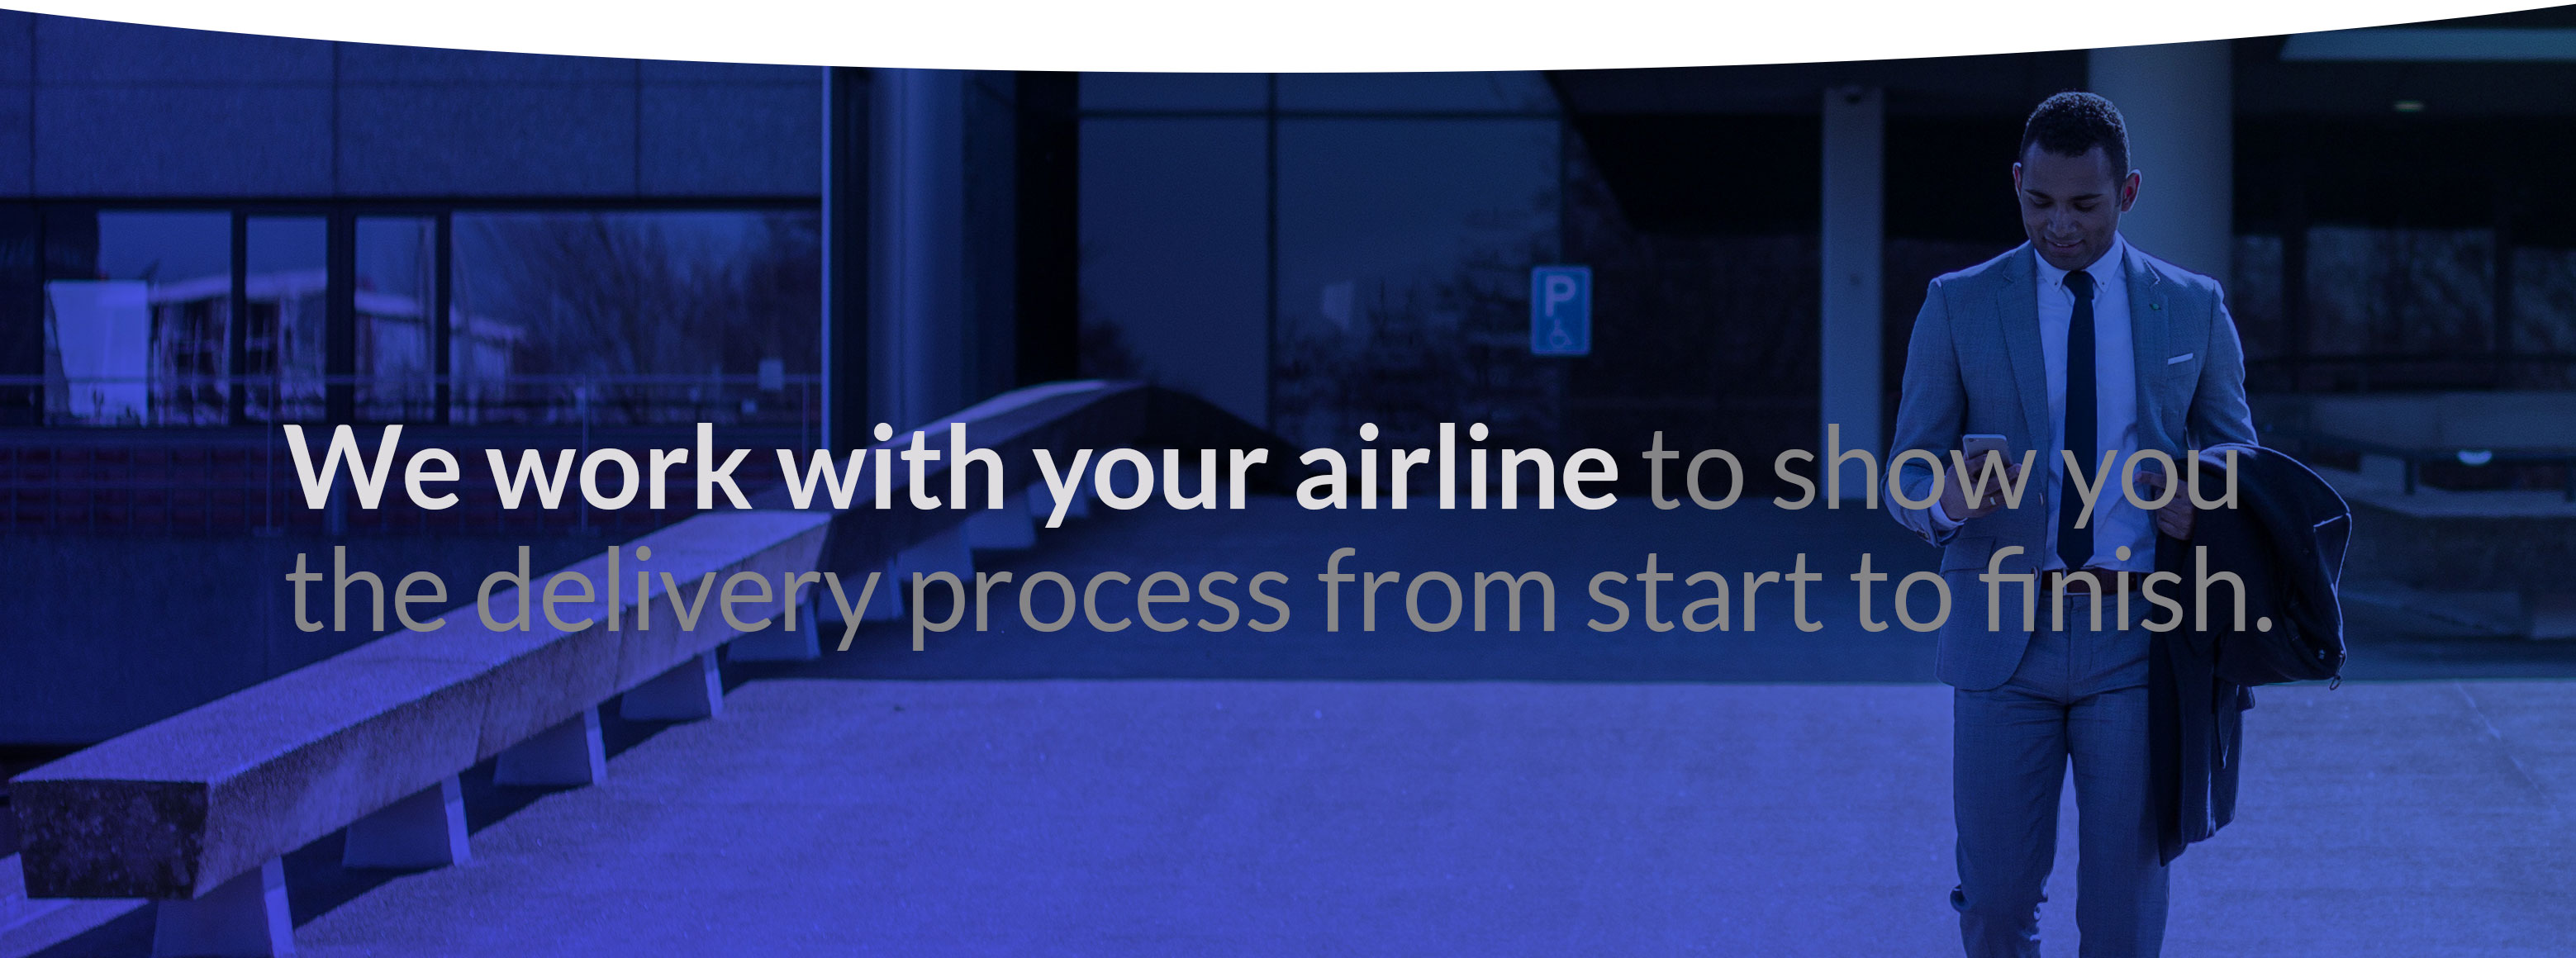 mobile header: Text we work with your airline to show you the delivery process from start to finish.